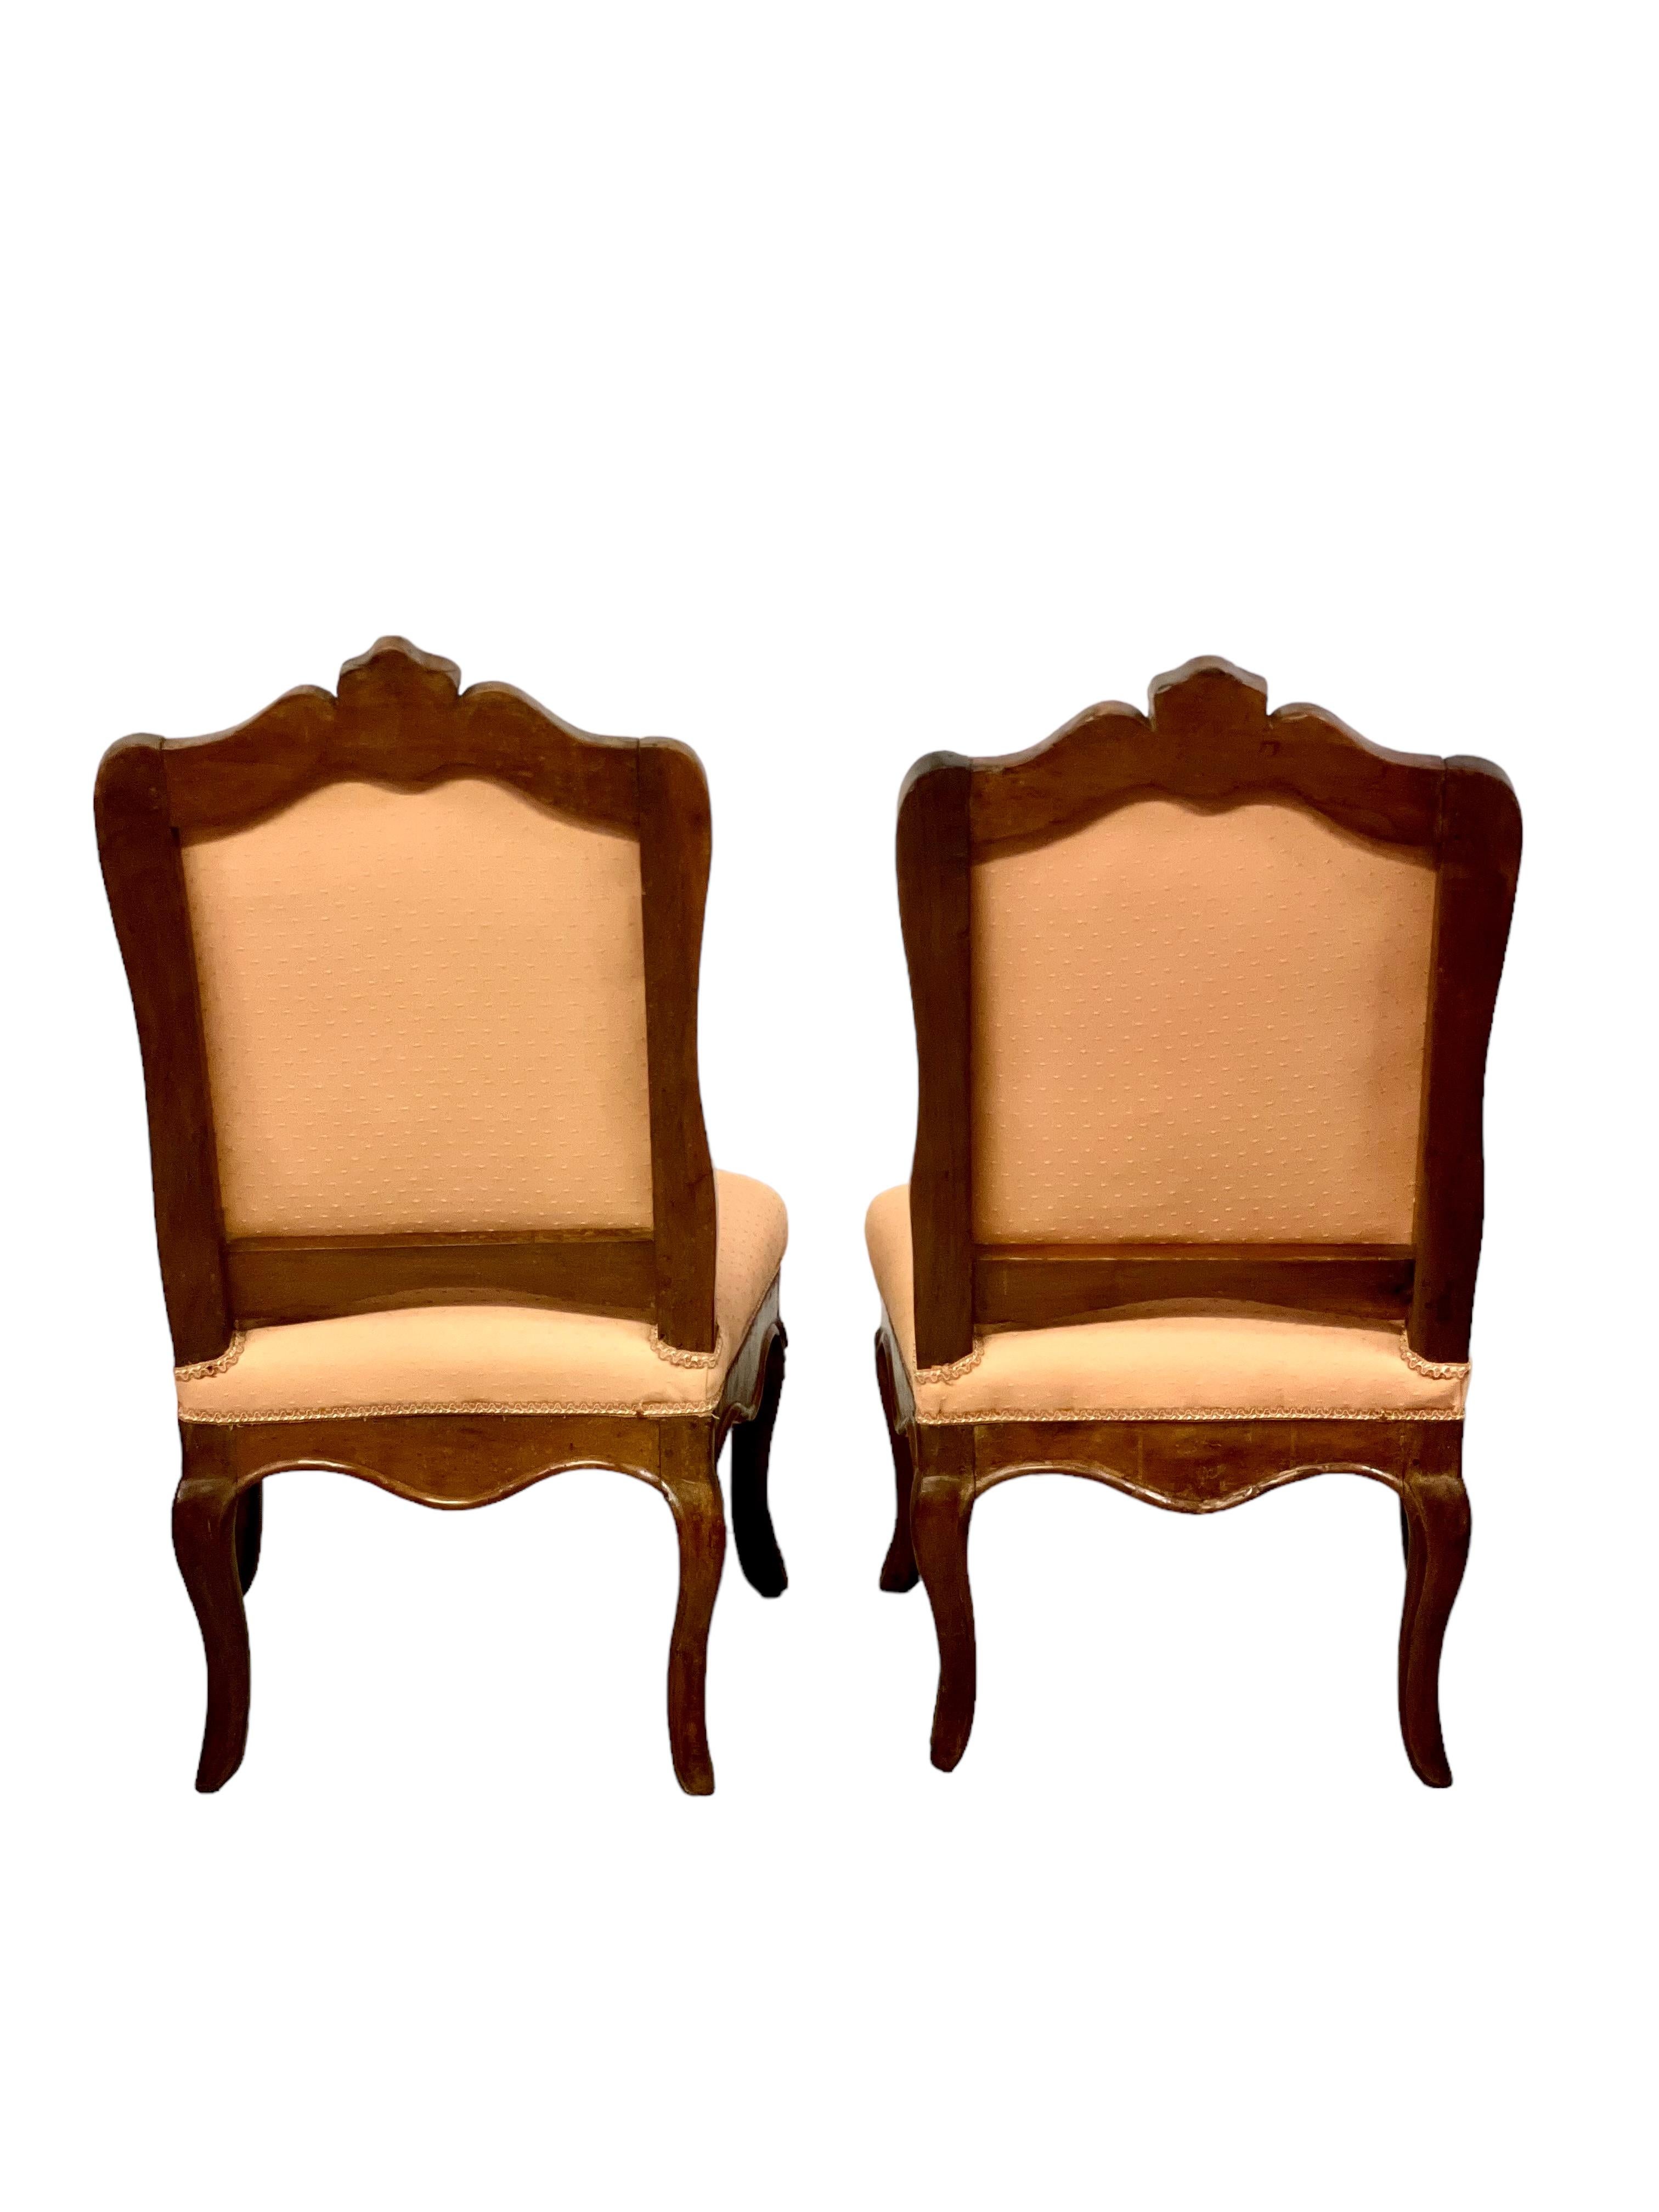 A wonderful and rare pair of sculpted Regency slipper chairs in beech, believed to date from around 1720, and raised on four cabriole legs. 
These supremely comfortable chairs feature shaped,padded backs and seats, beautifully upholstered in